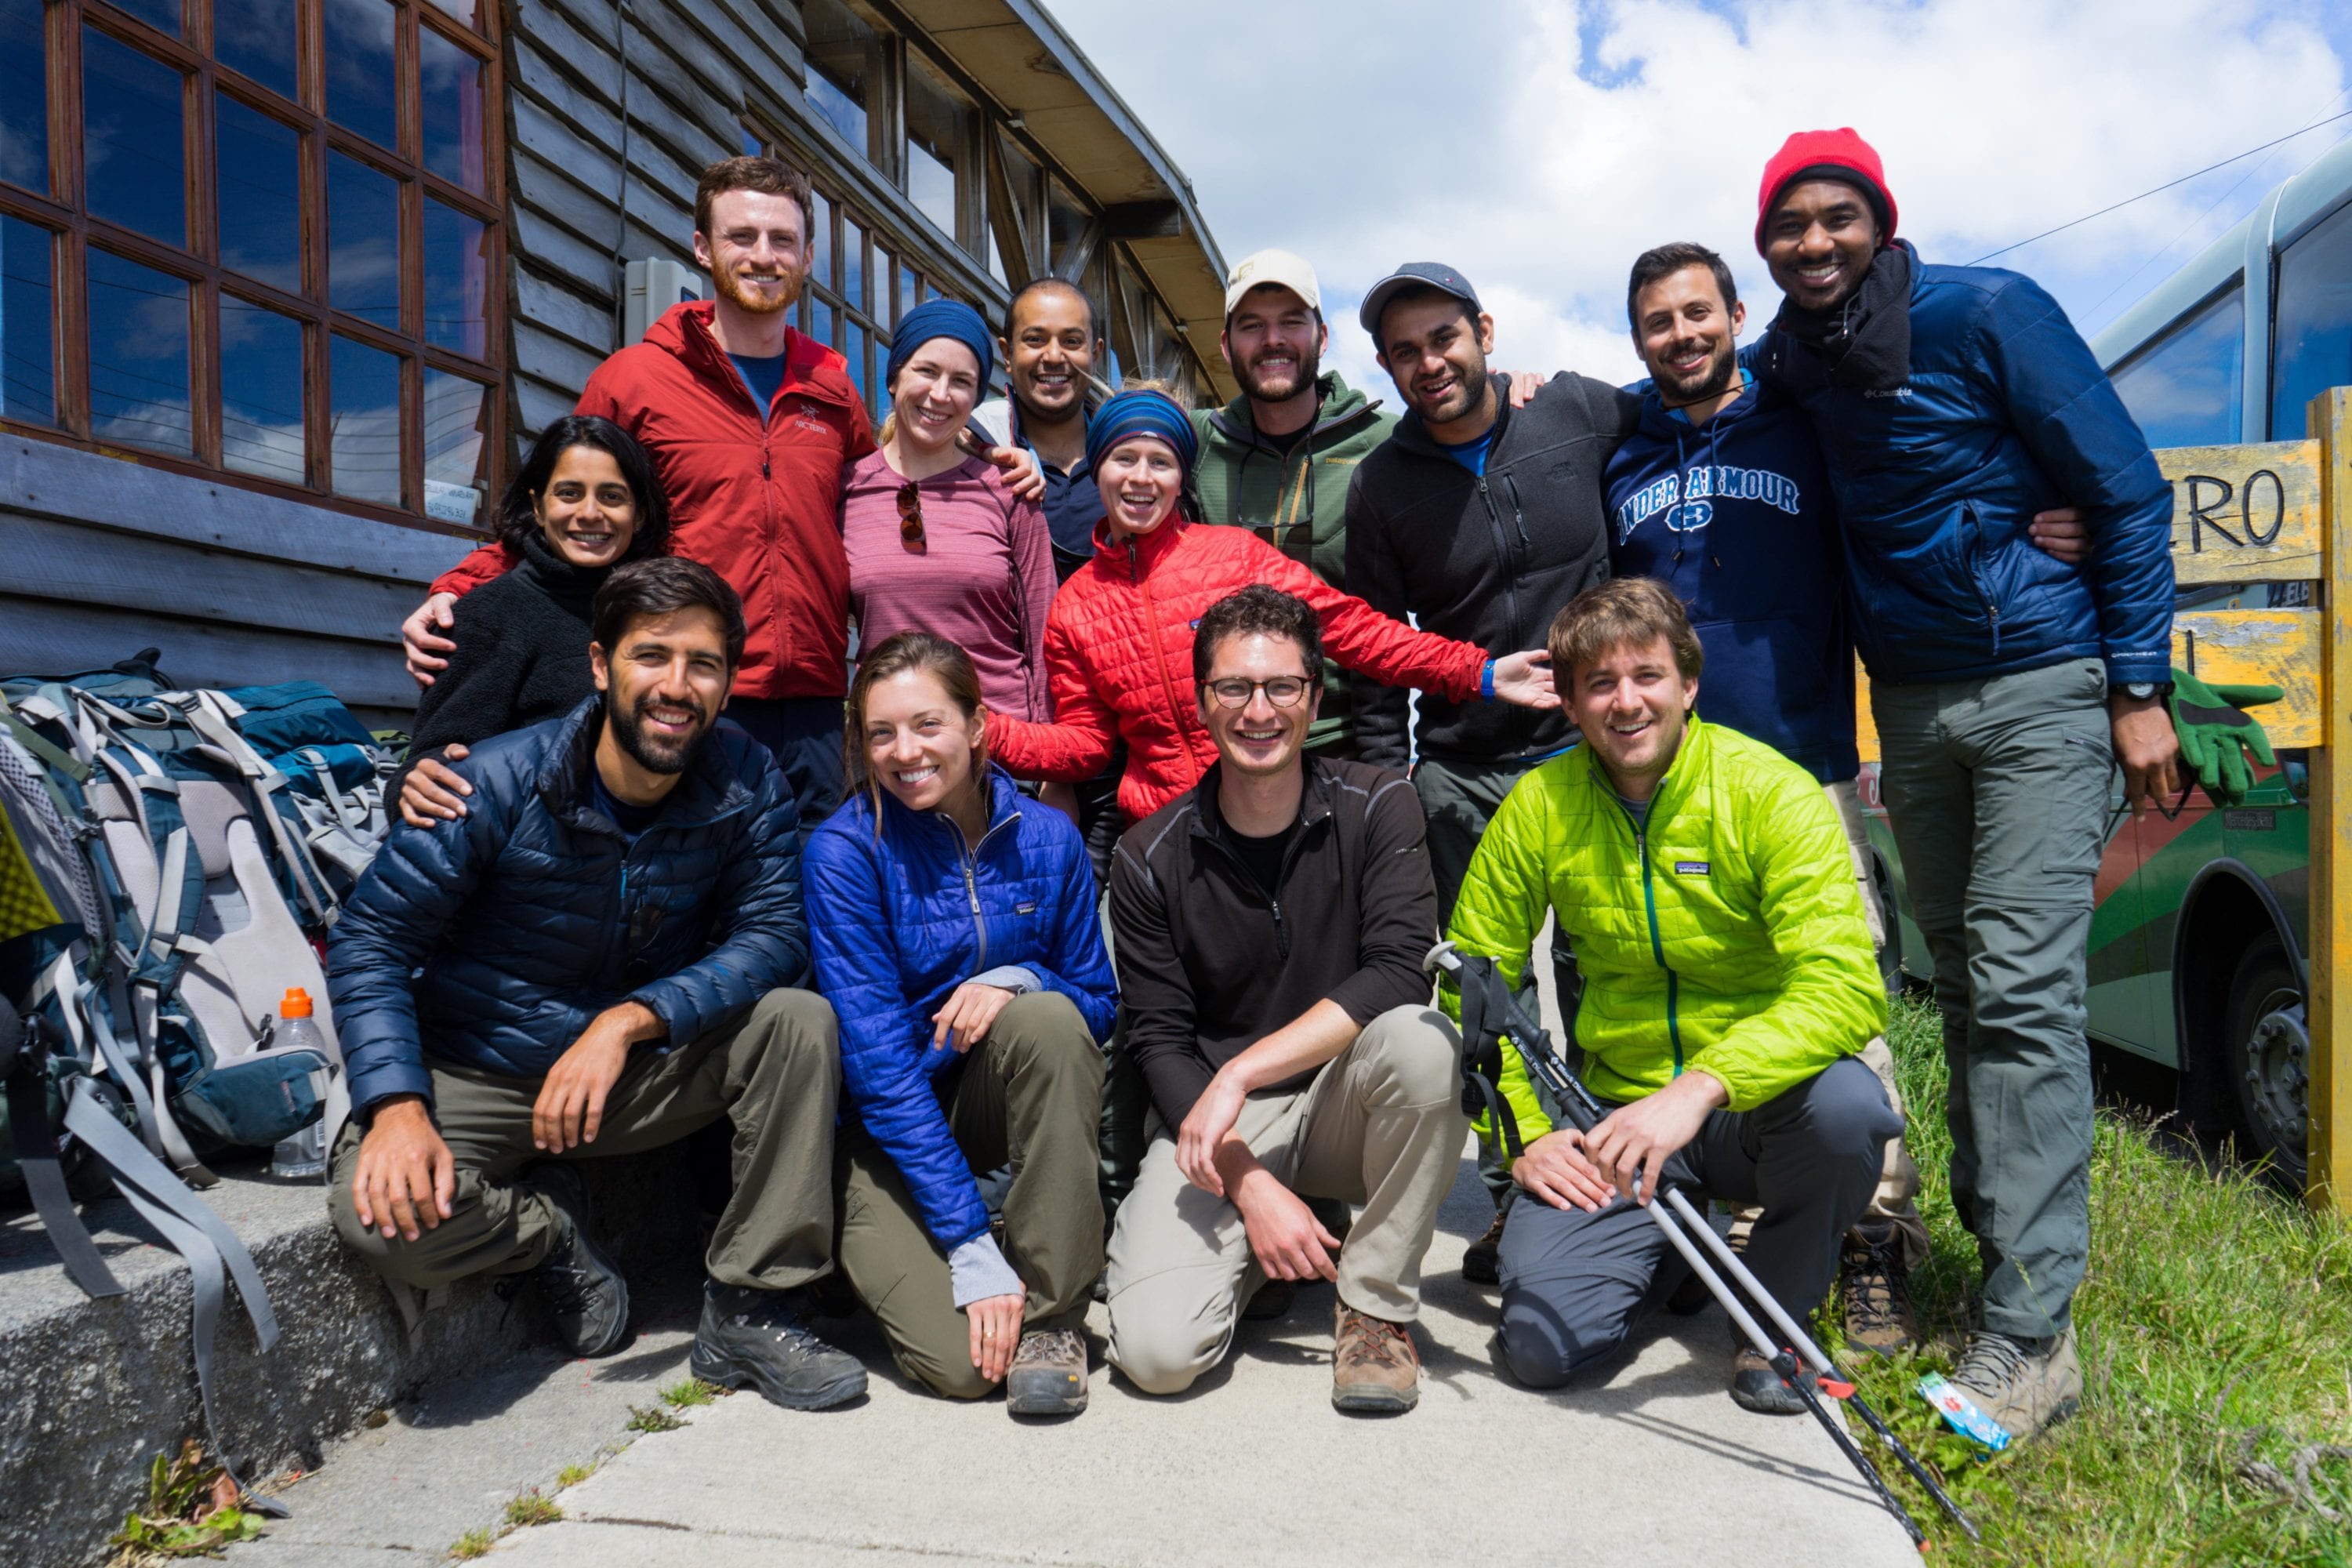 The Patagonia group takes a break during the trek.